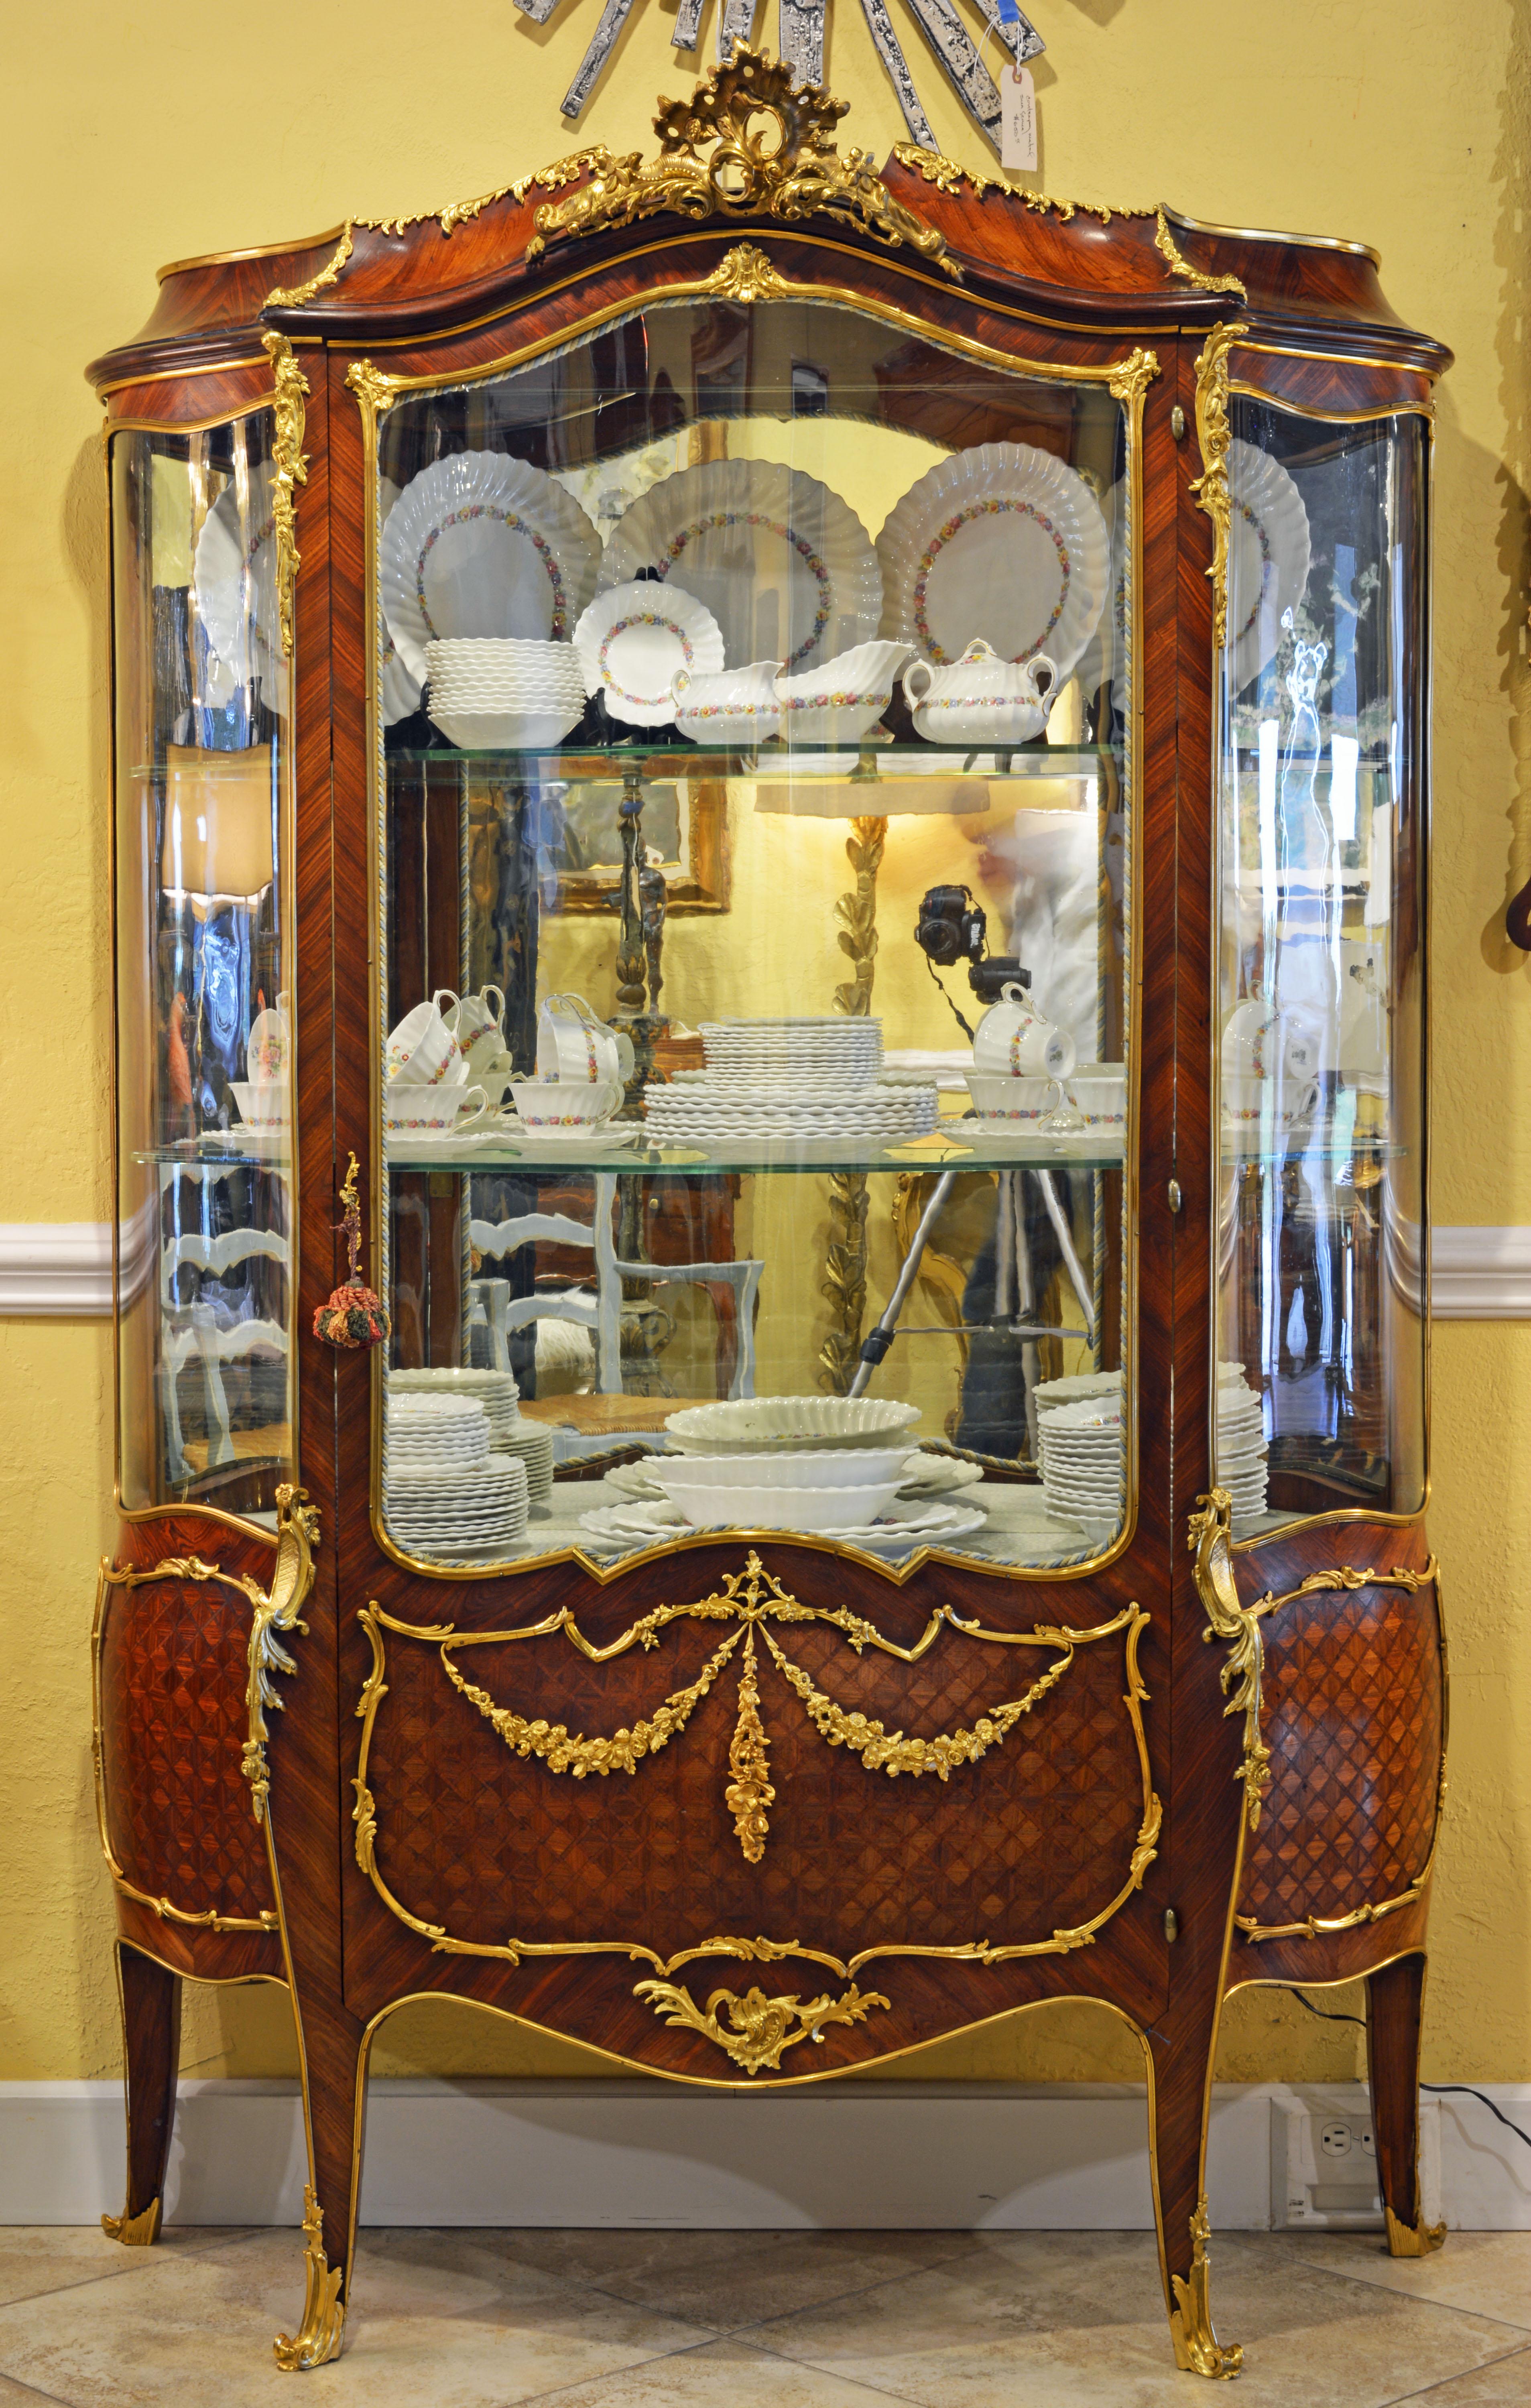 This magnificent French Louis XV style vernis martin vitrine or display cabinet features a kingwood and satinwood parquetry body adorned by richly detailed ormolu or gilt bronze mounts in the form of scrolls, leaf work and garlands creating an